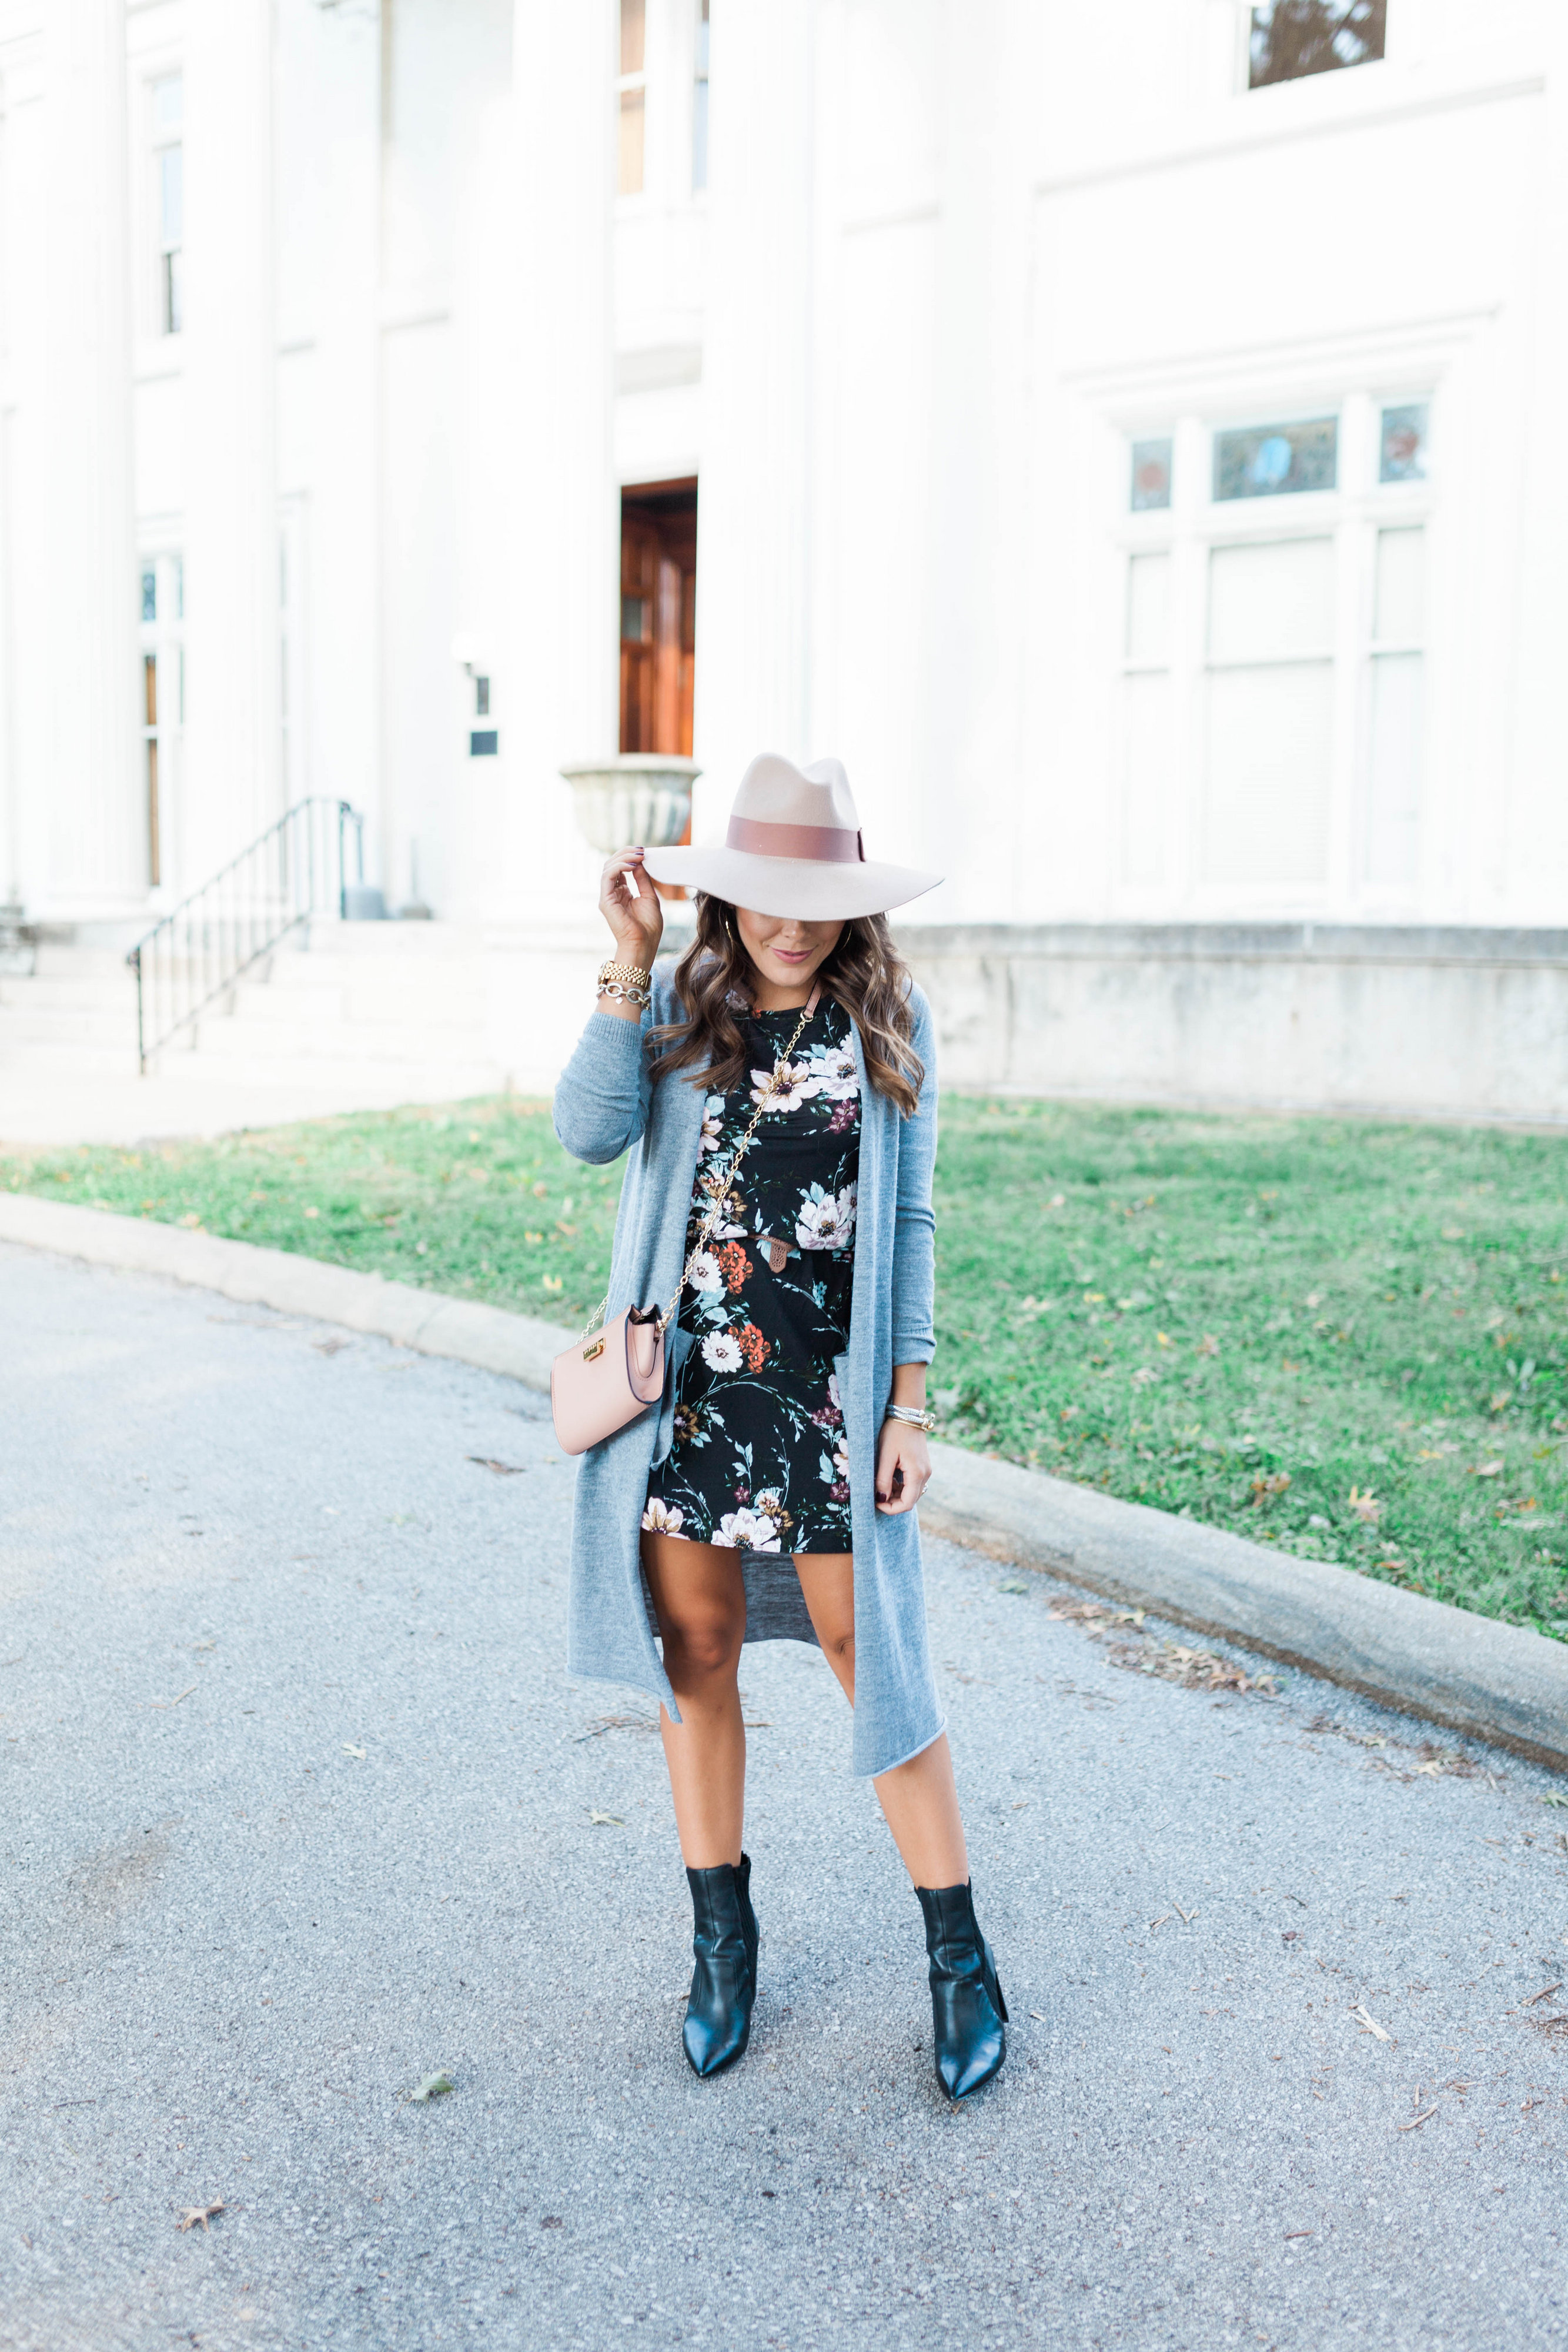 Black Floral Dress / How to style a long cardigan